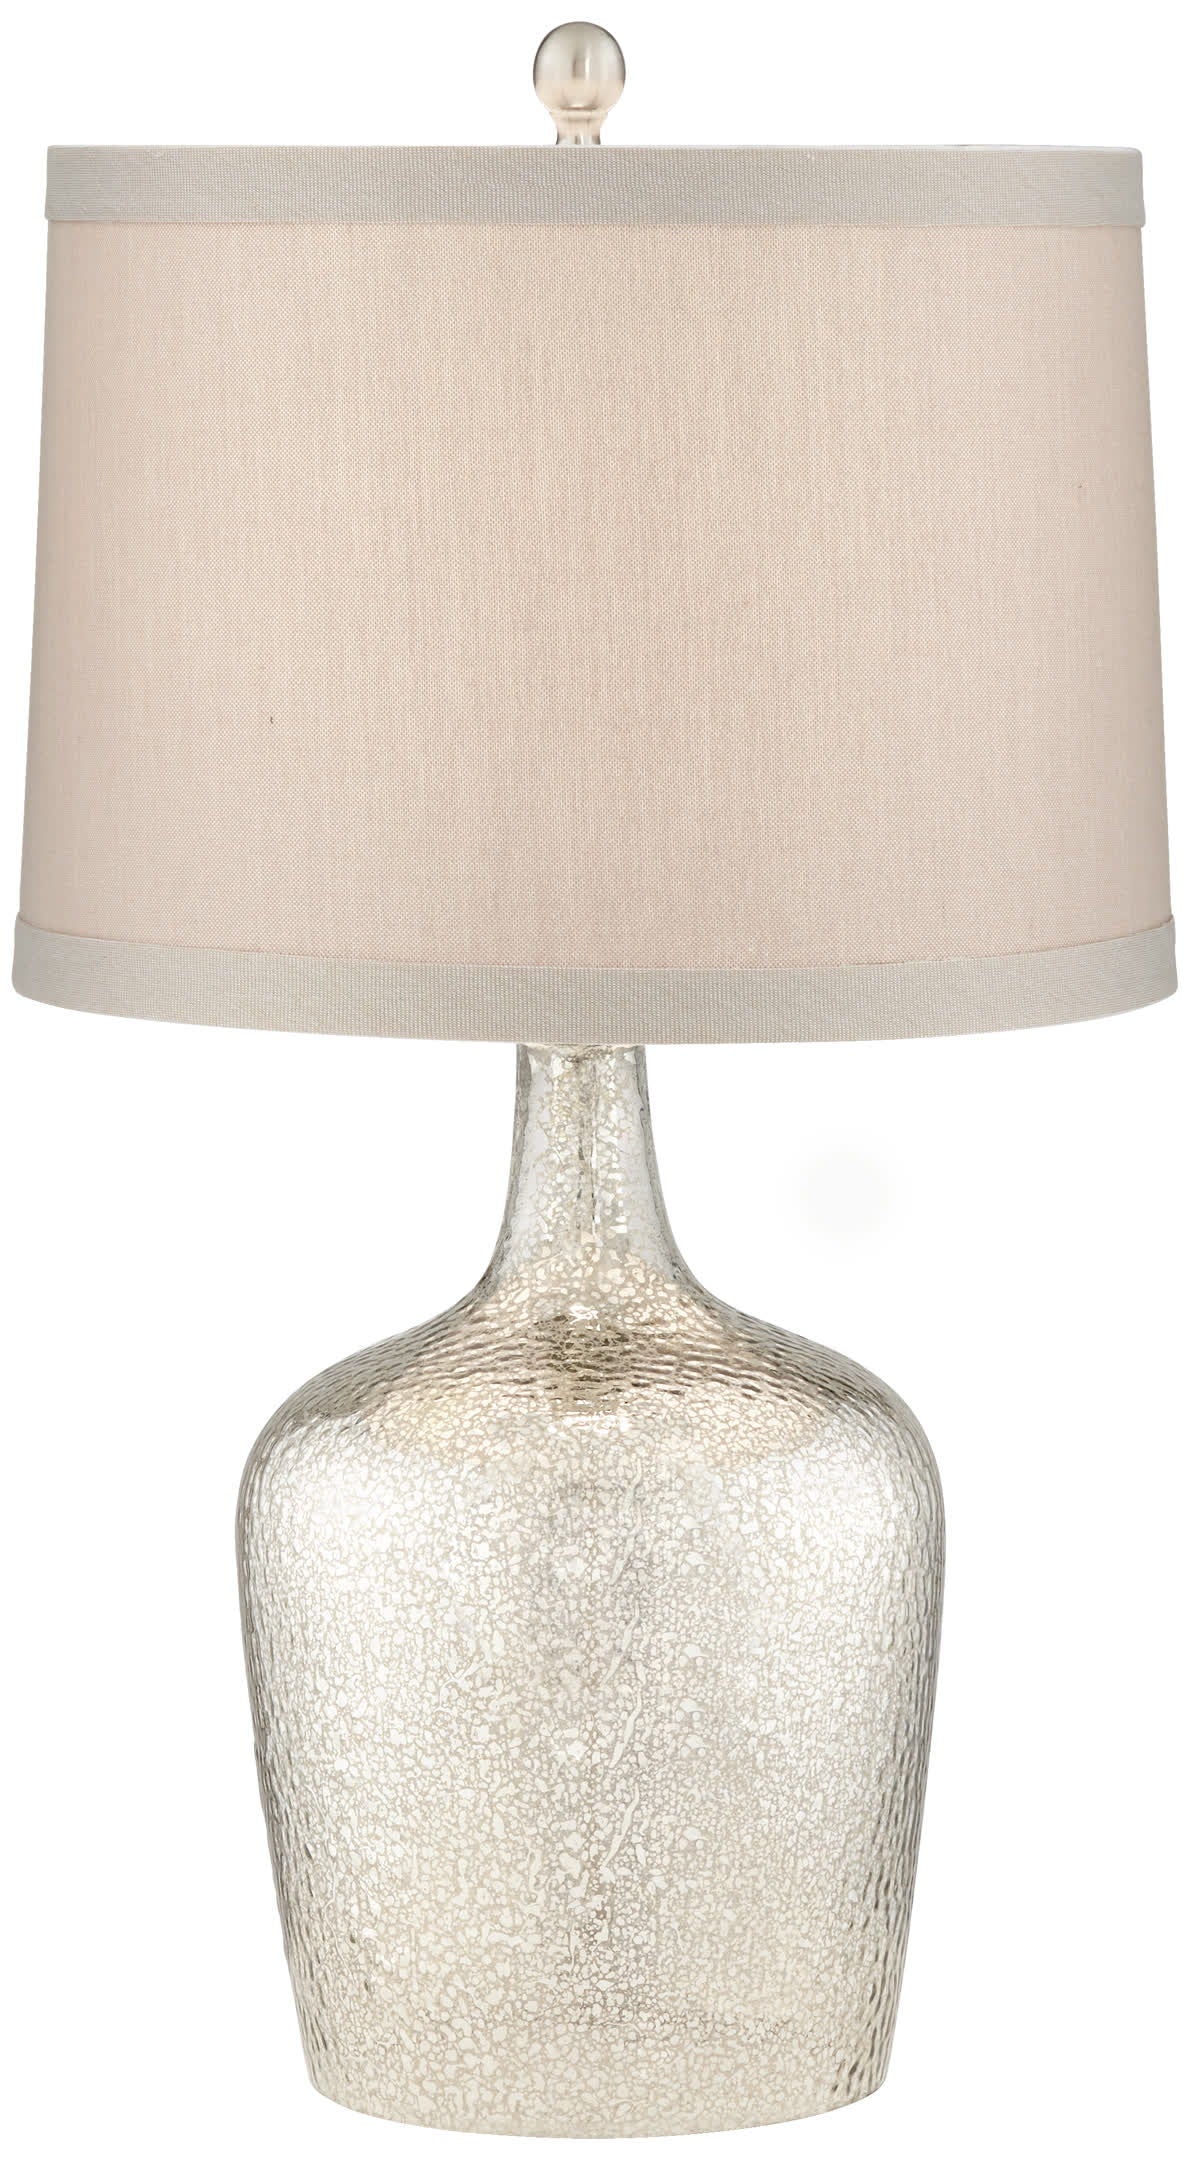 Champagne - Table Lamp - Silver Mercure